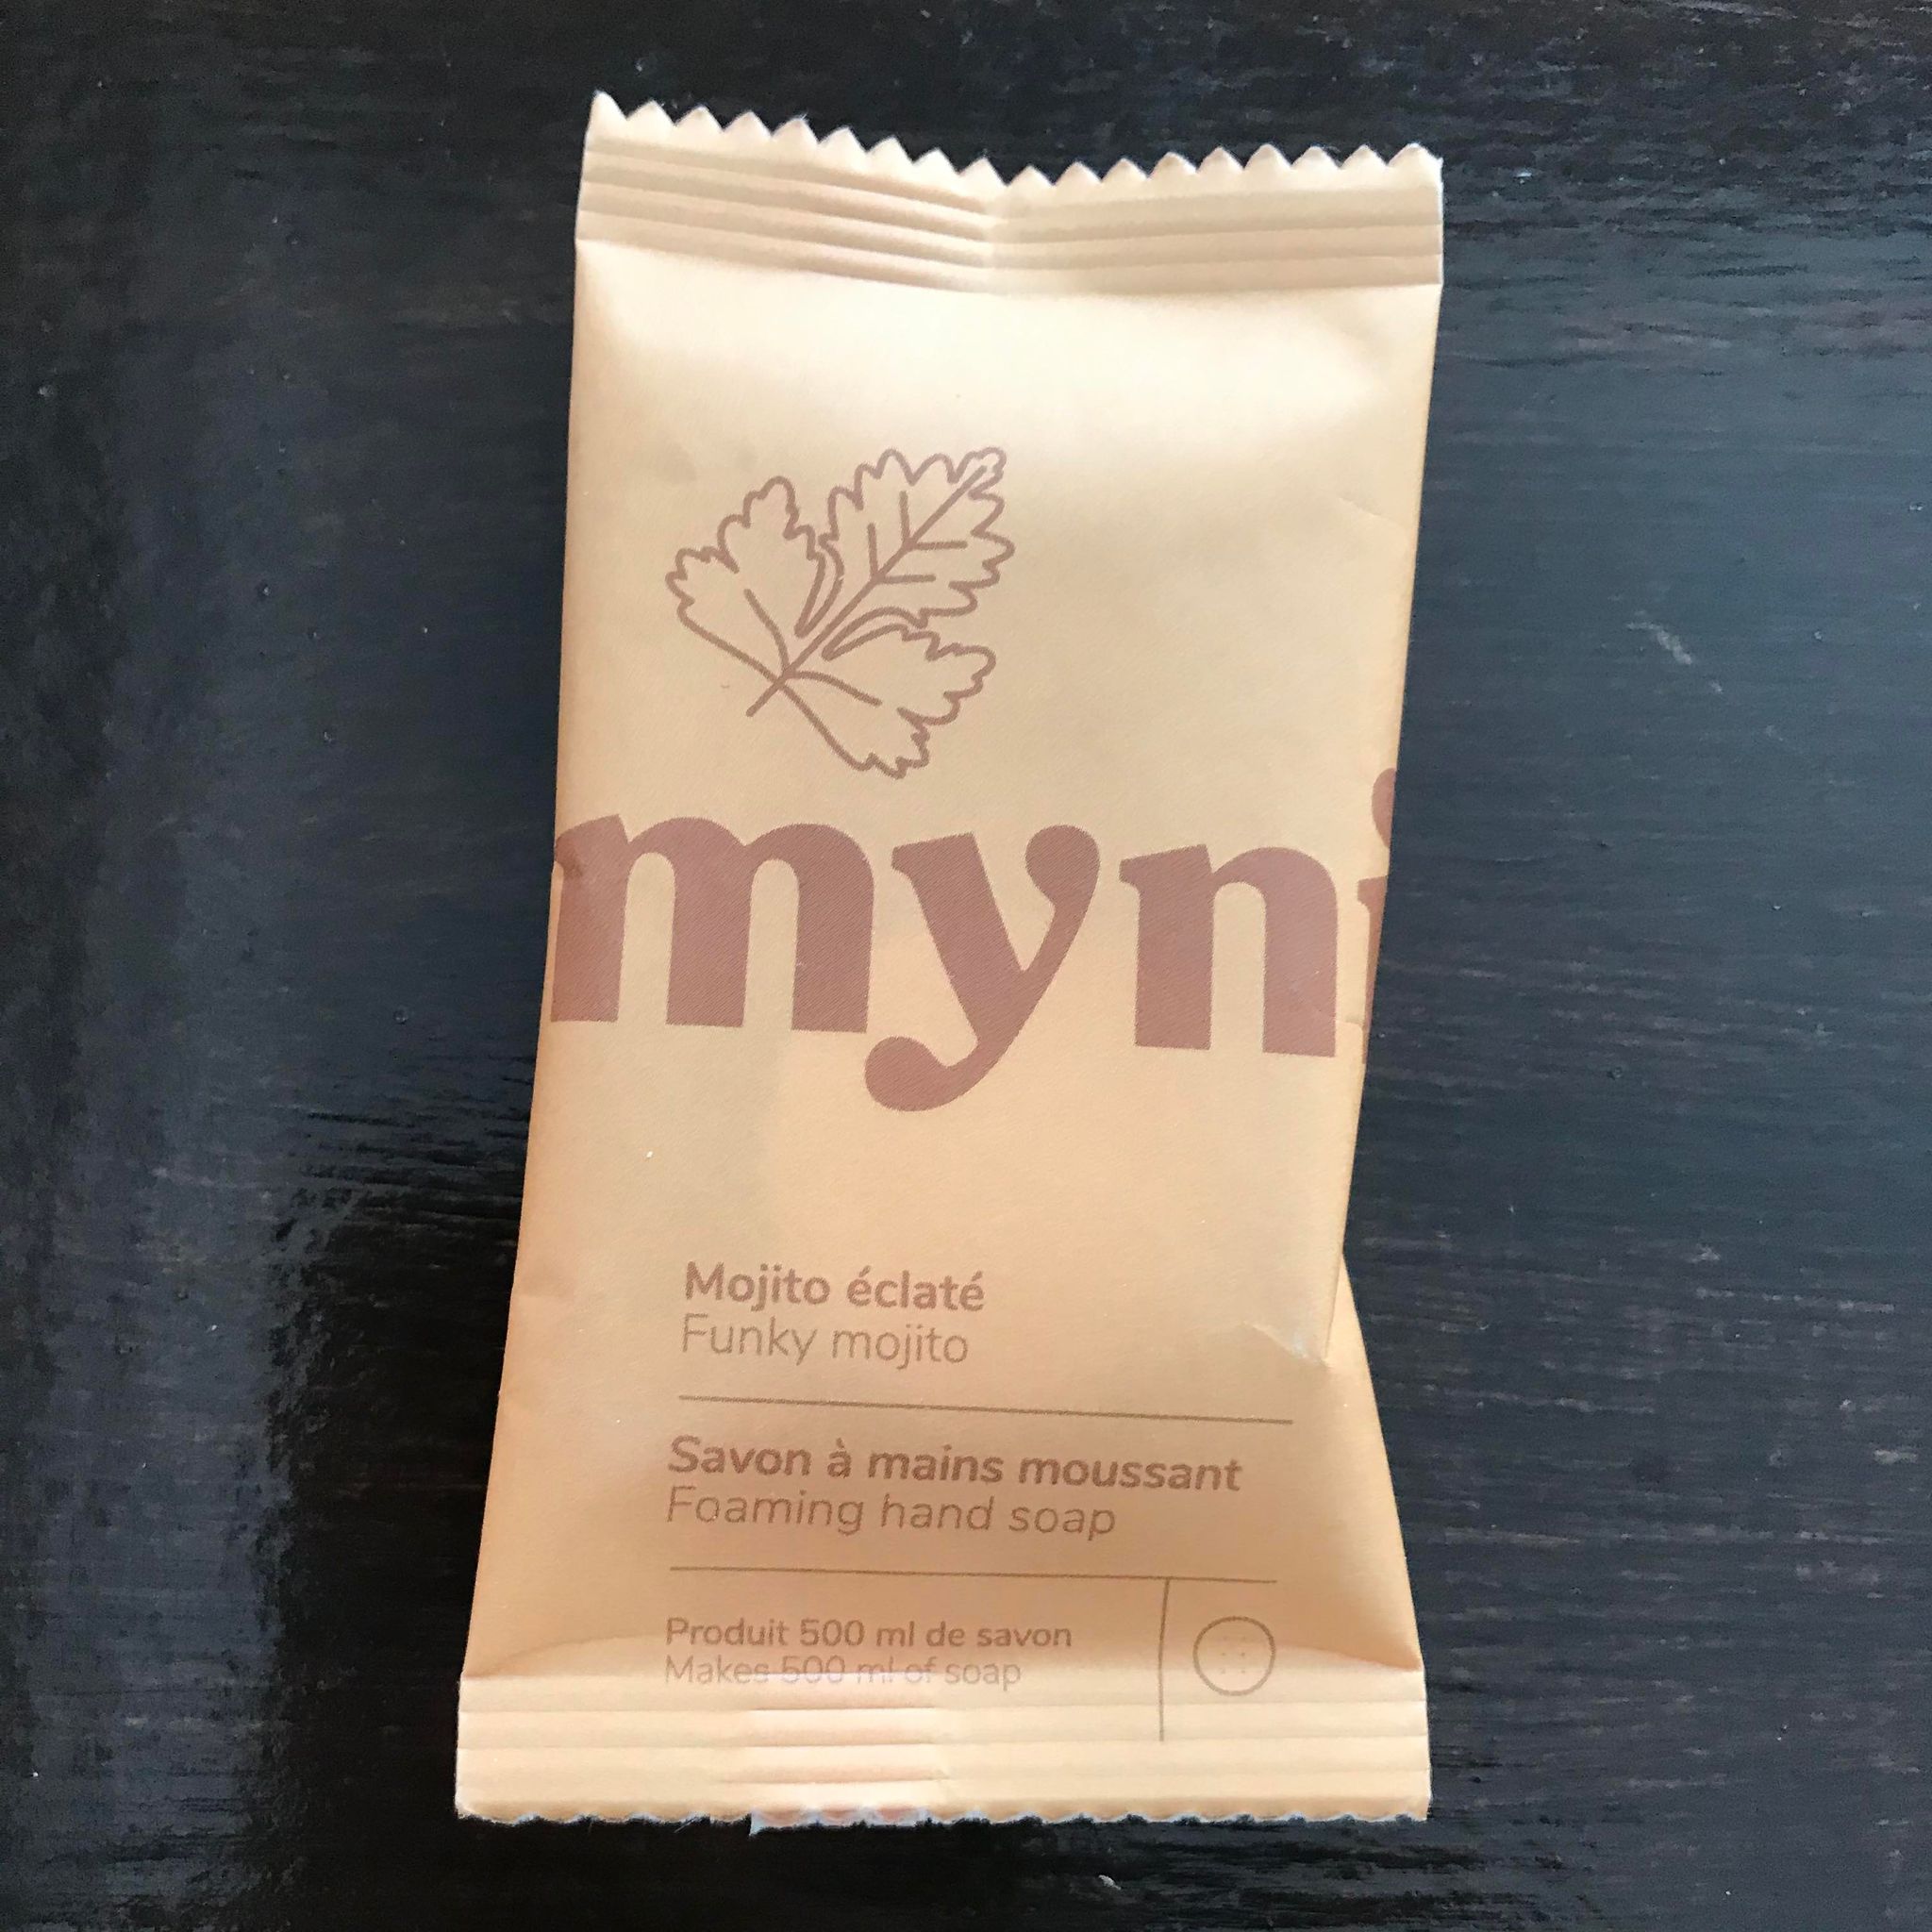 'Funky mojito' lime and cilantro scented foaming hand soap concentrate in compostable pouch made in canada by myni